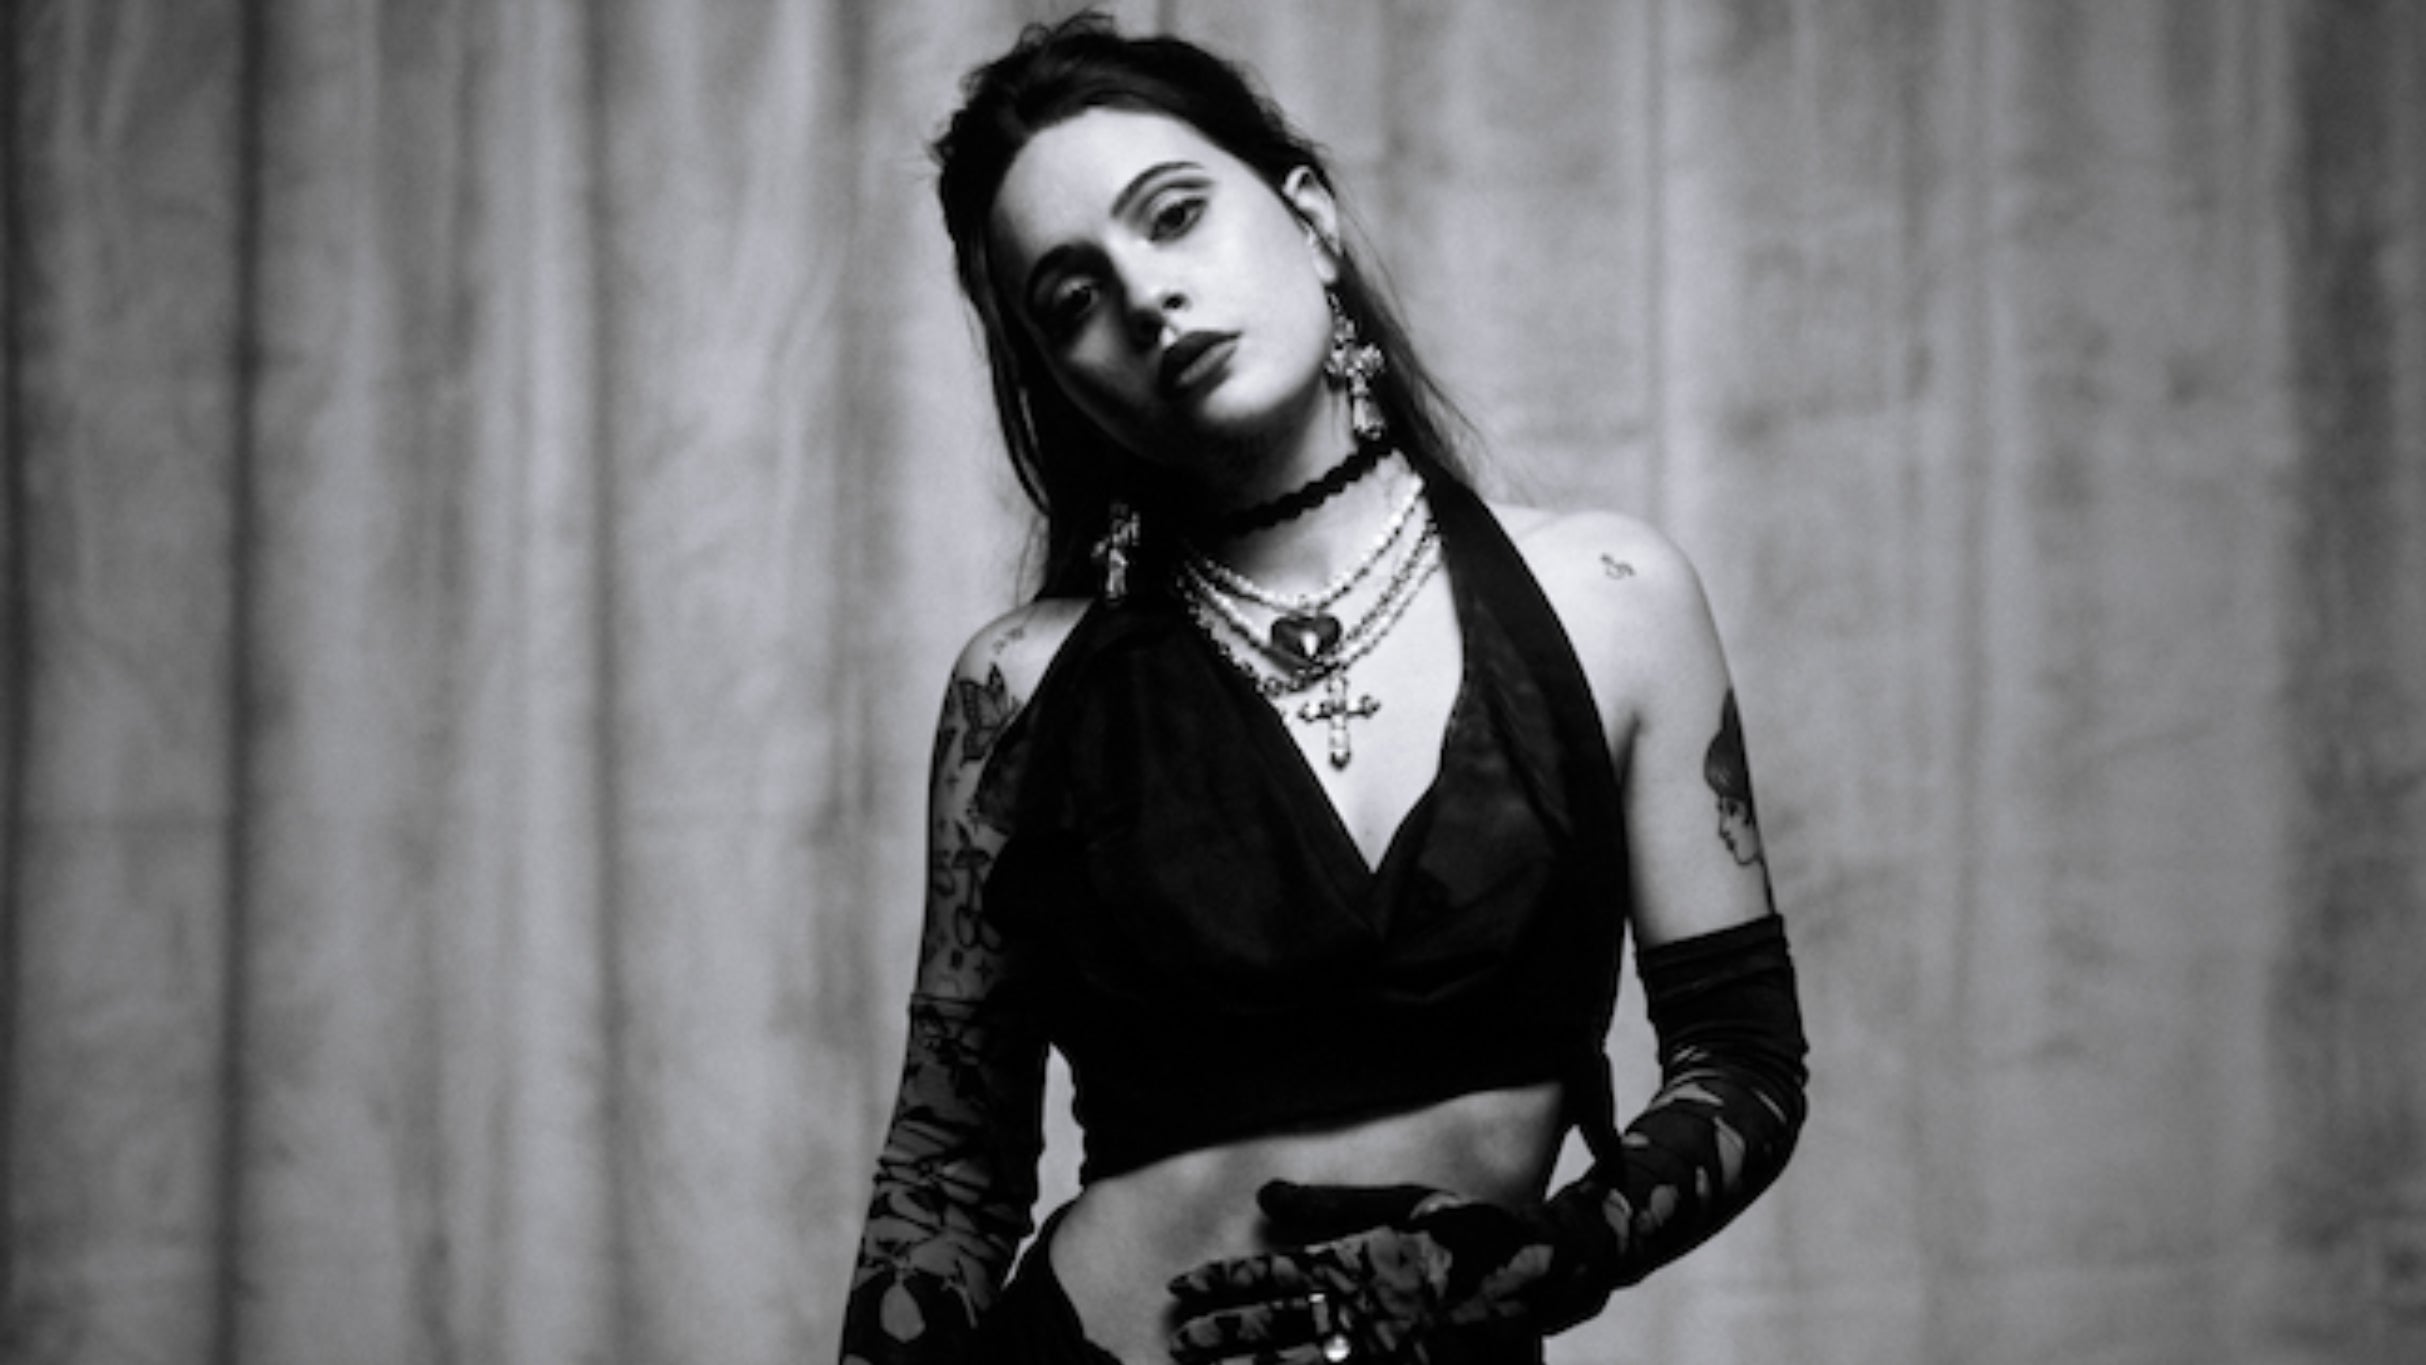 bea miller - gauche tour presale code for real tickets in Denver